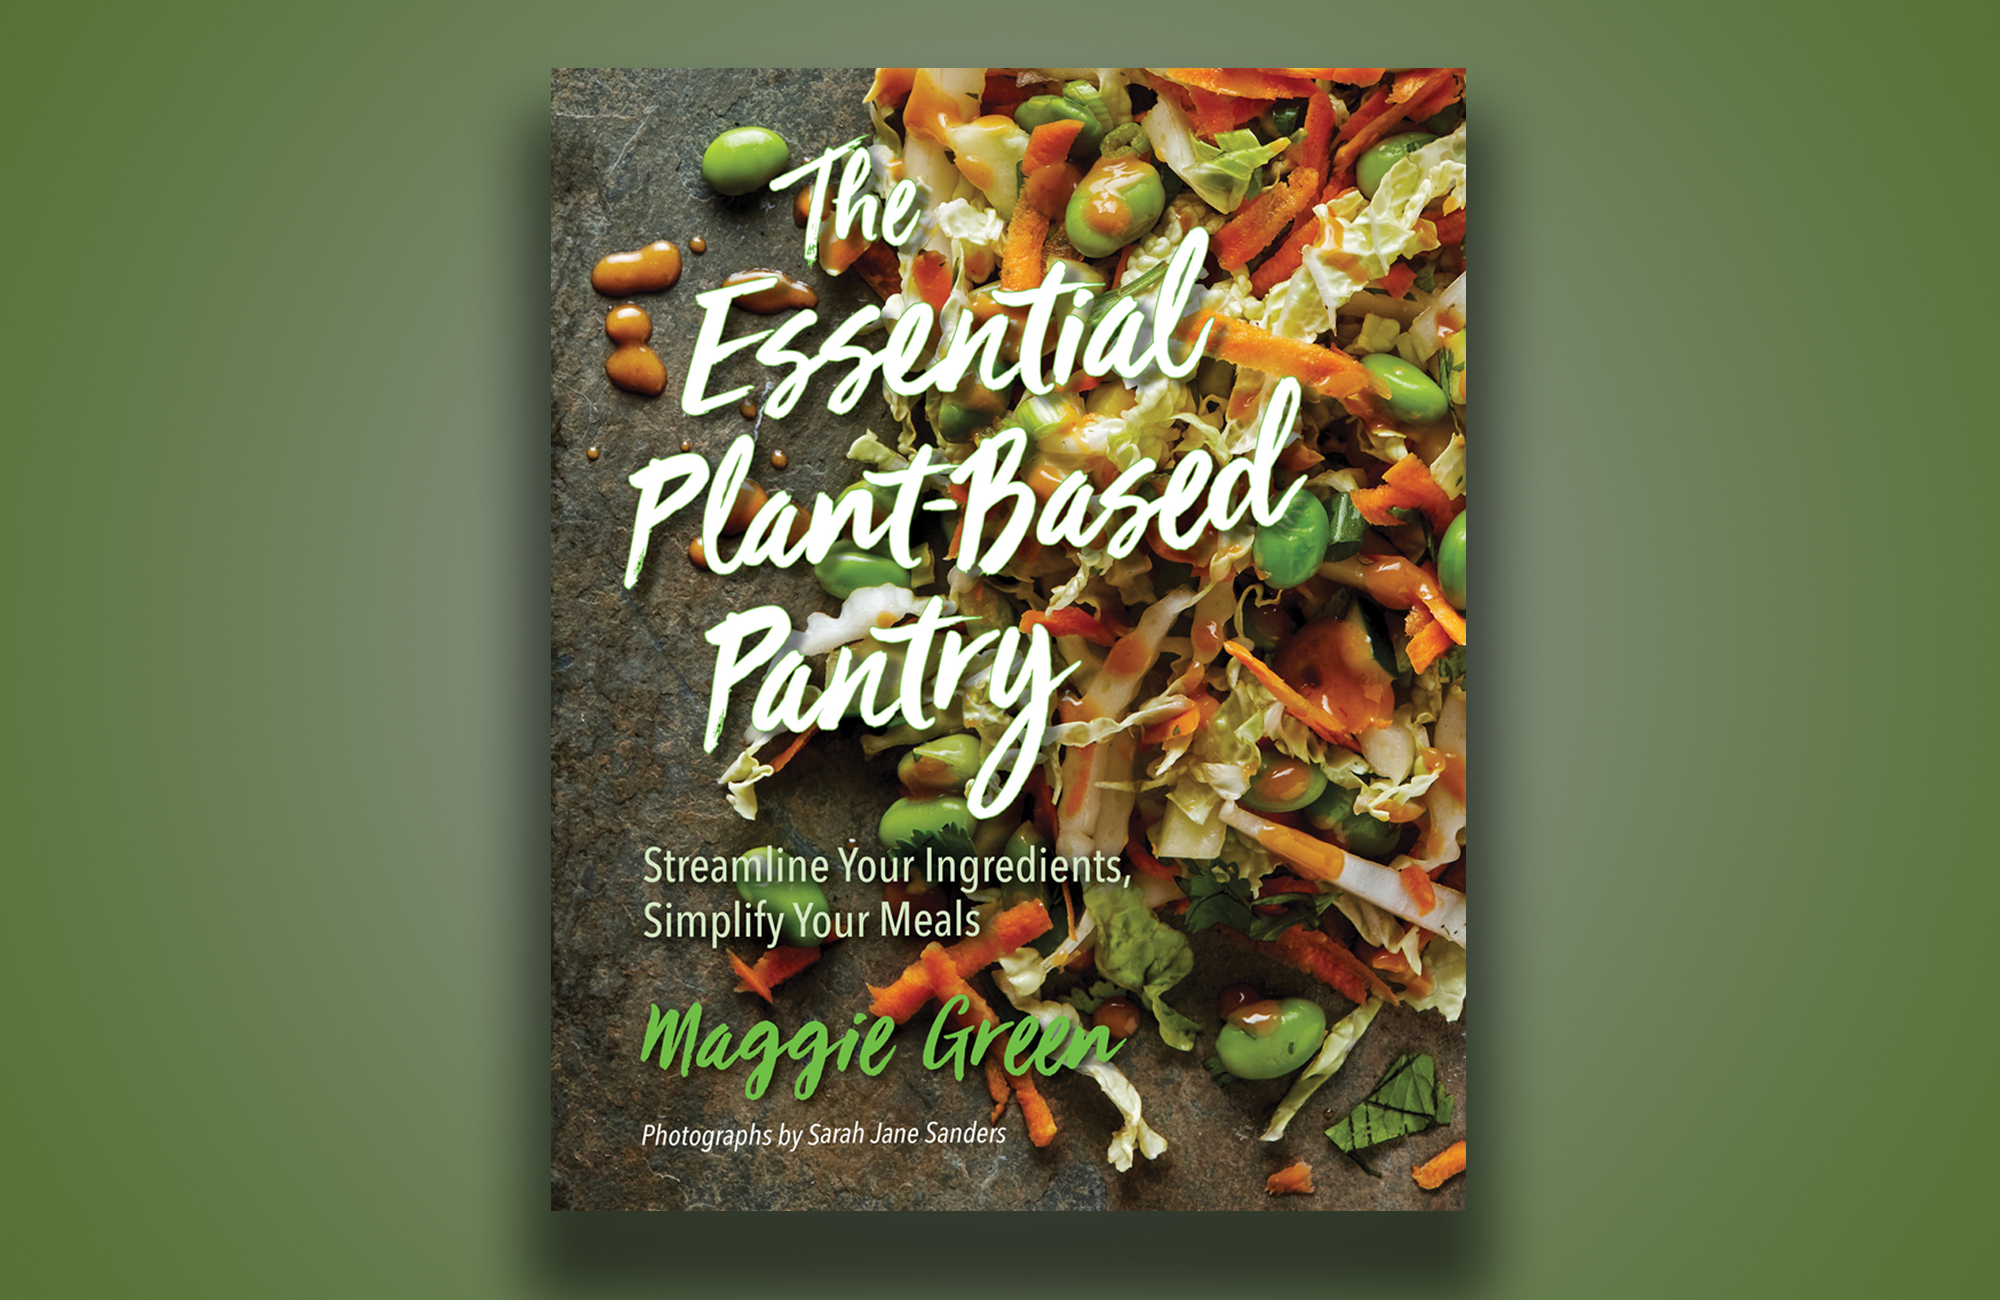 The Essential Plant-Based Pantry. Photo by Sarah Jane Sanders from The Essential Plant-Based Pantry by Maggie Green. Provided courtesy of Indiana University Press.